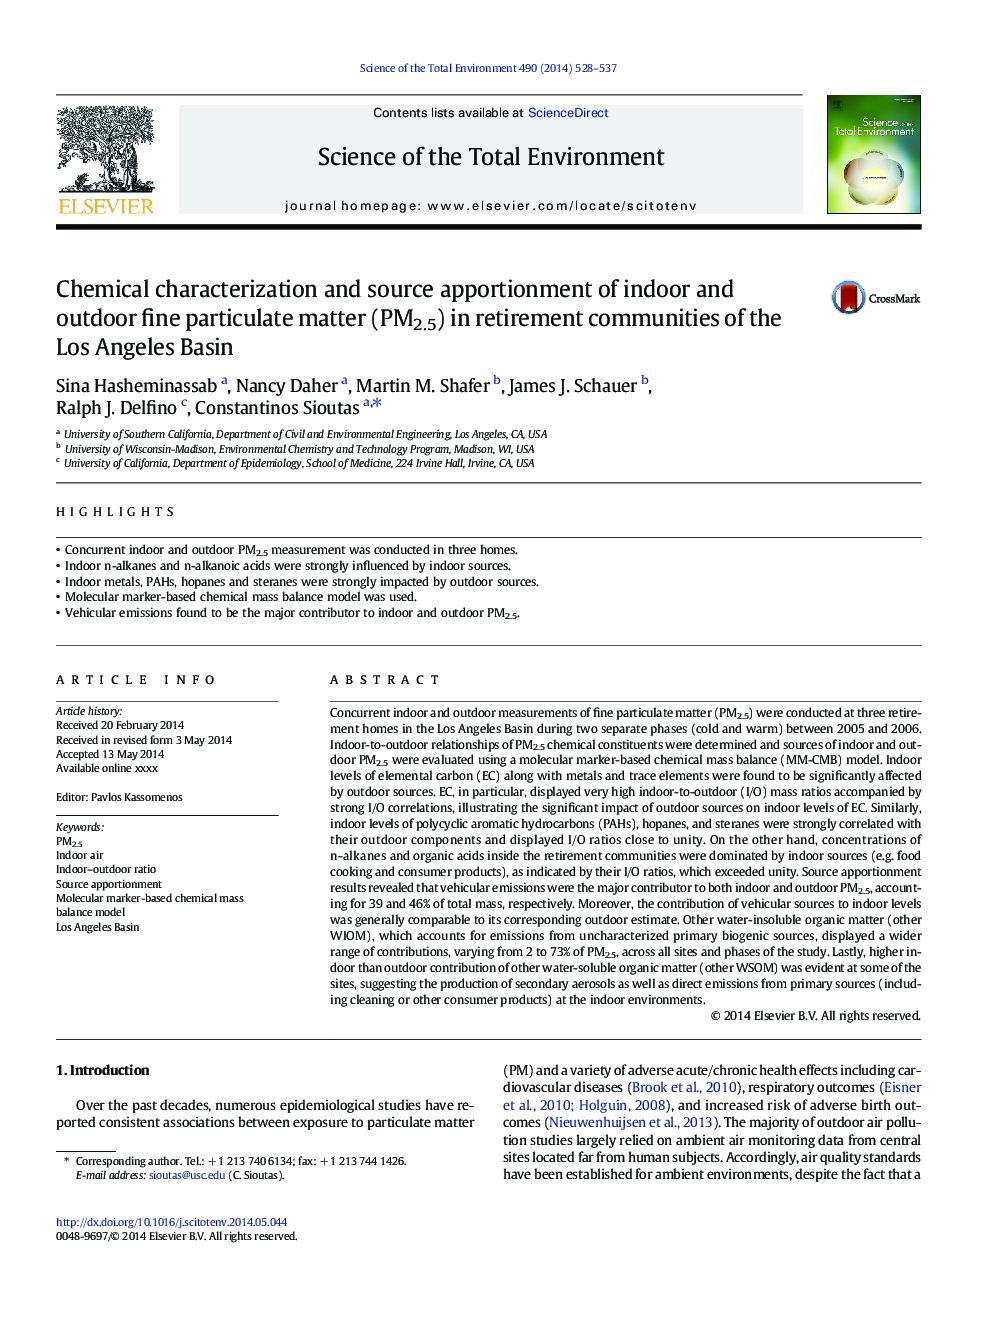 Chemical characterization and source apportionment of indoor and outdoor fine particulate matter (PM2.5) in retirement communities of the Los Angeles Basin